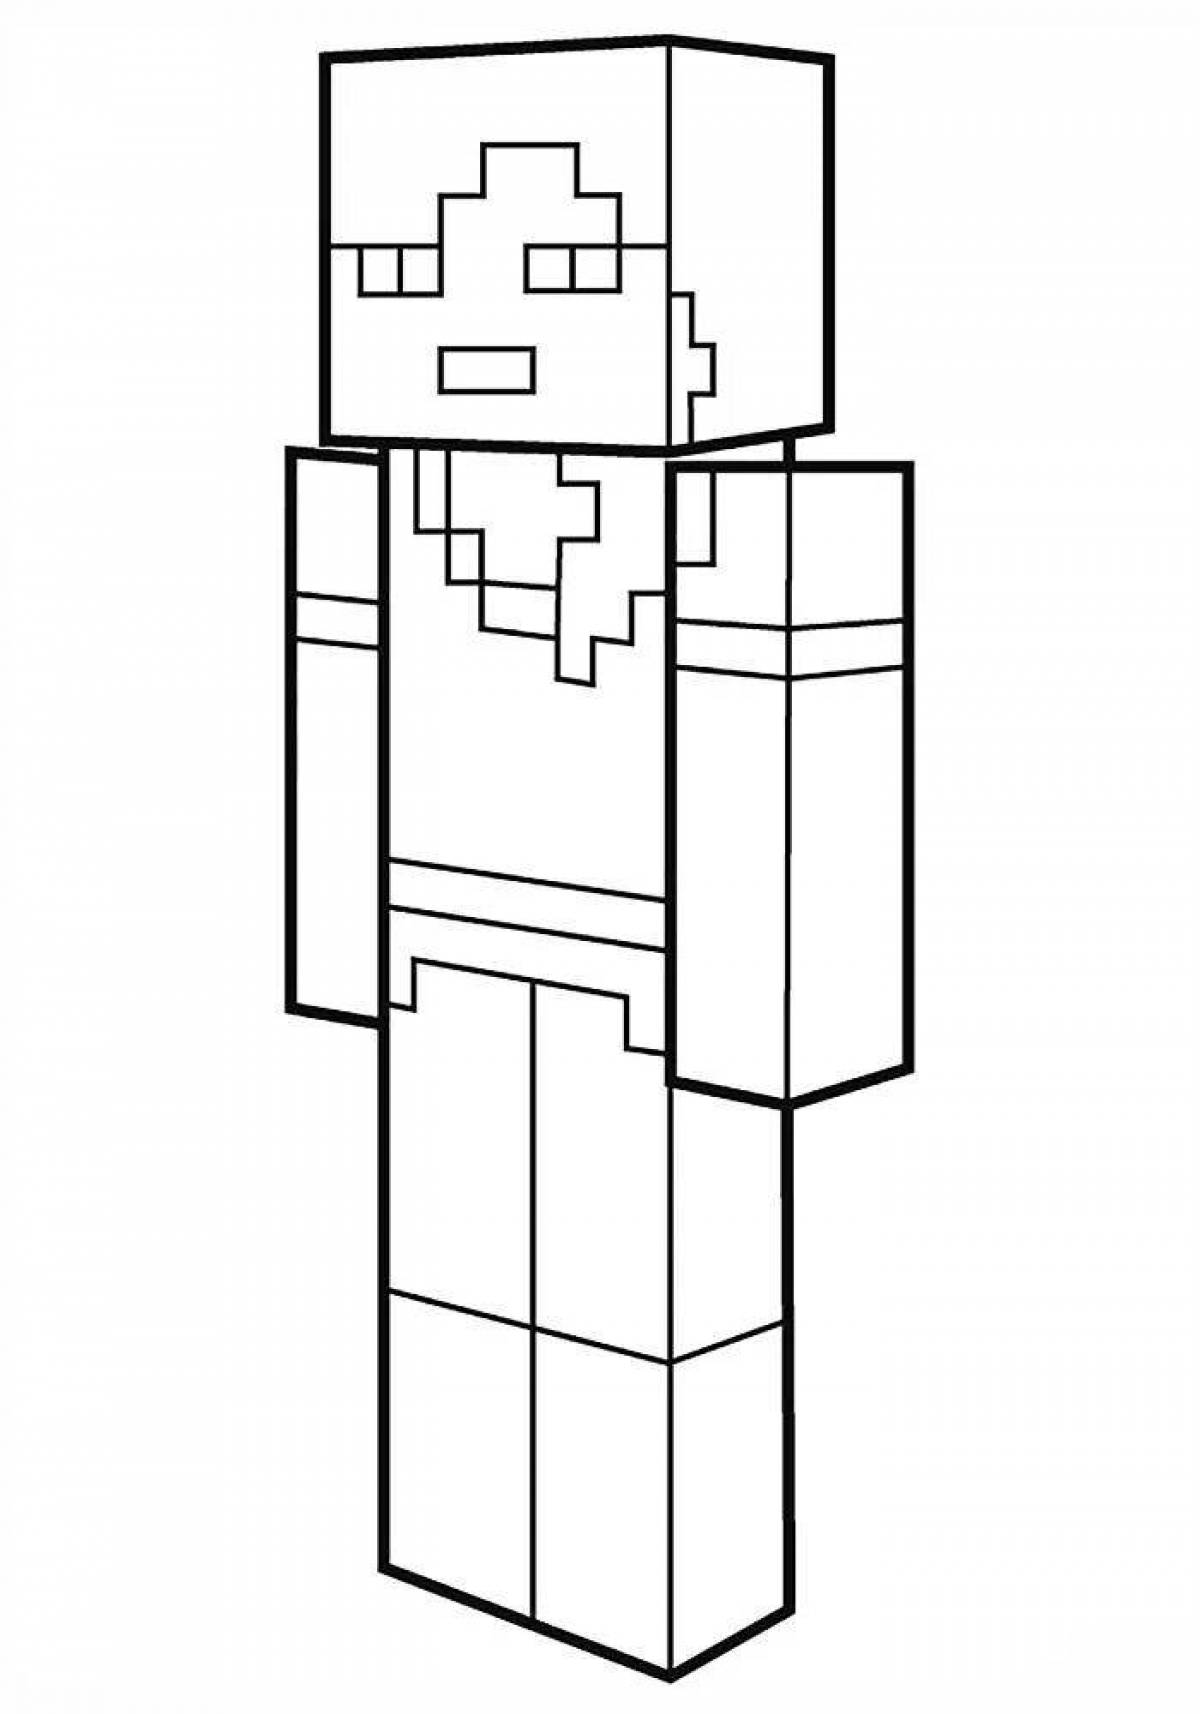 Exciting print minecraft picture